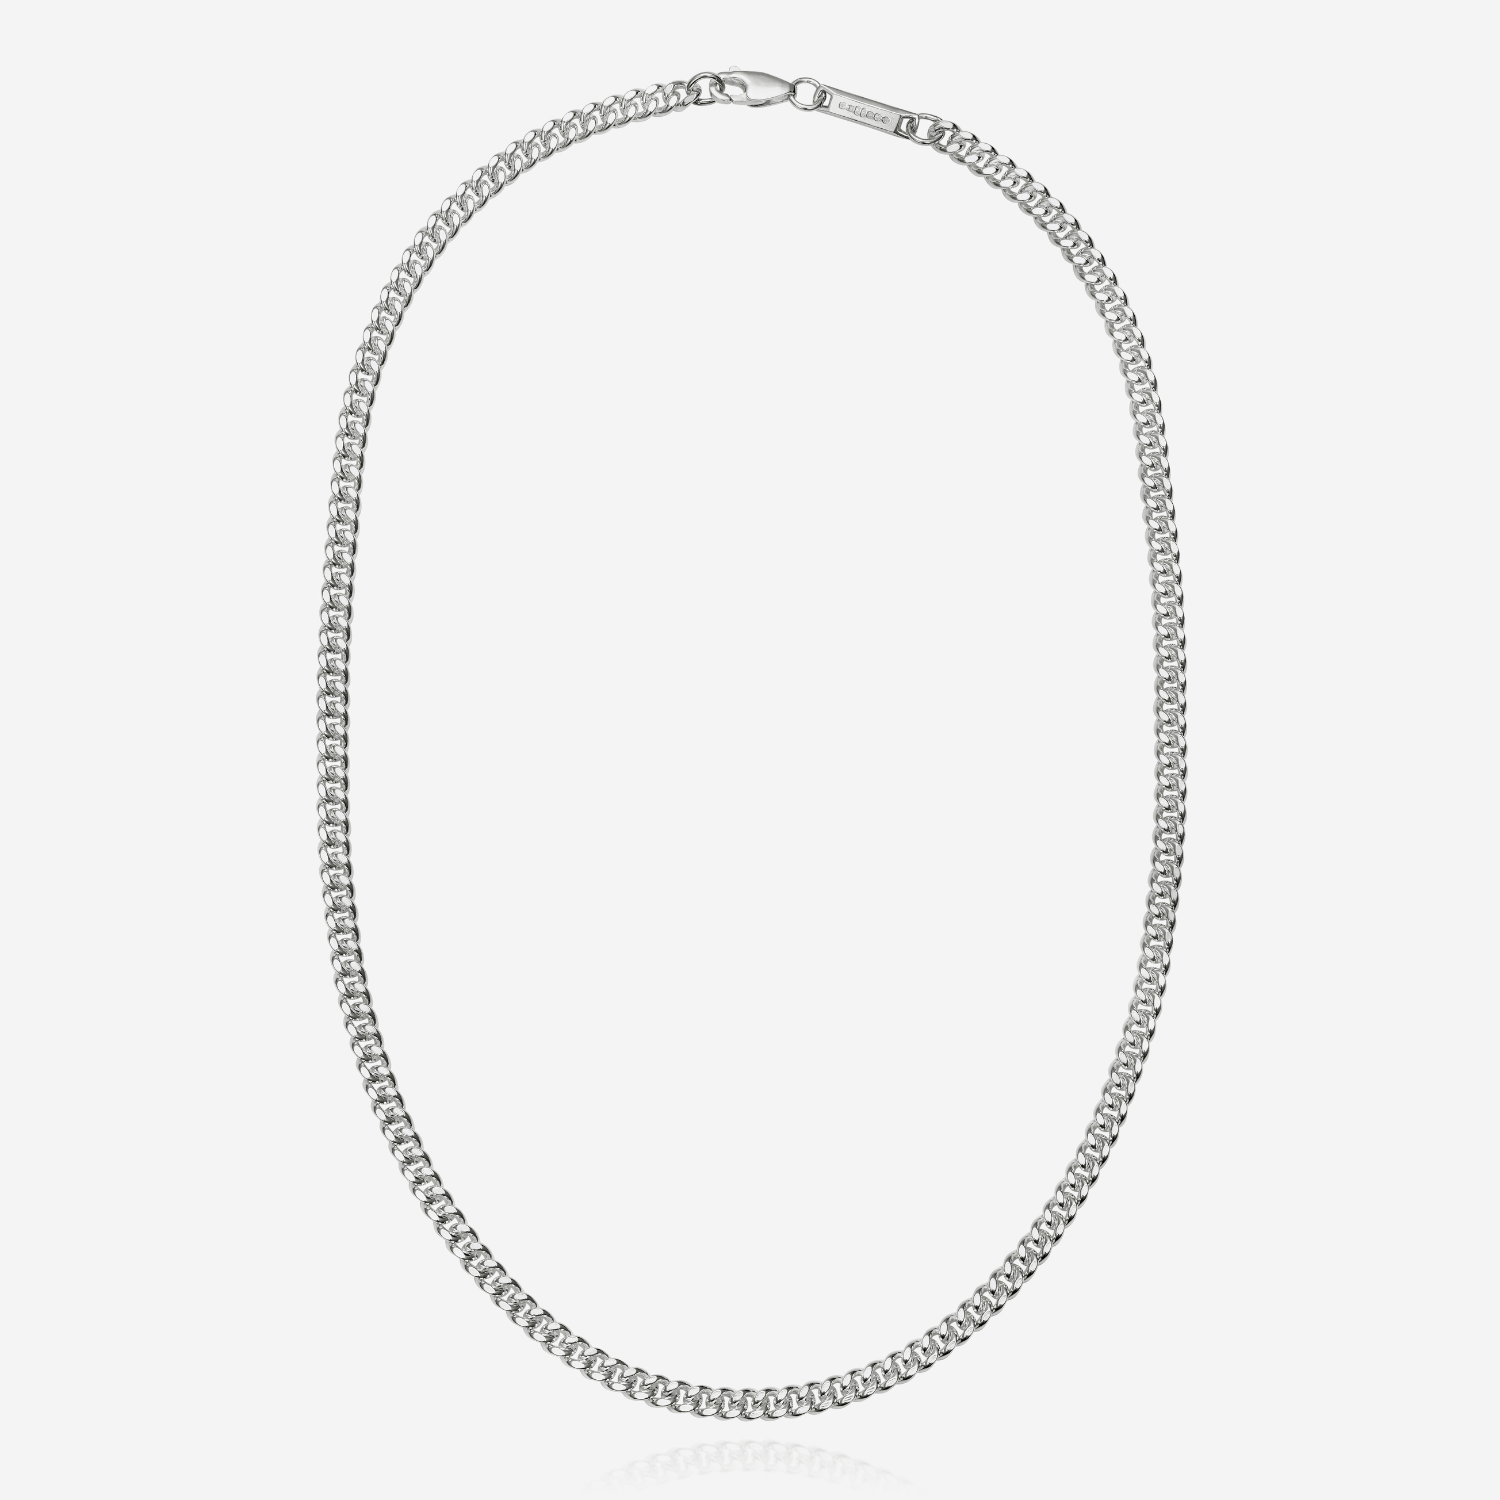 886 Royal Mint Necklaces 886 Curb Chain in Sterling Silver